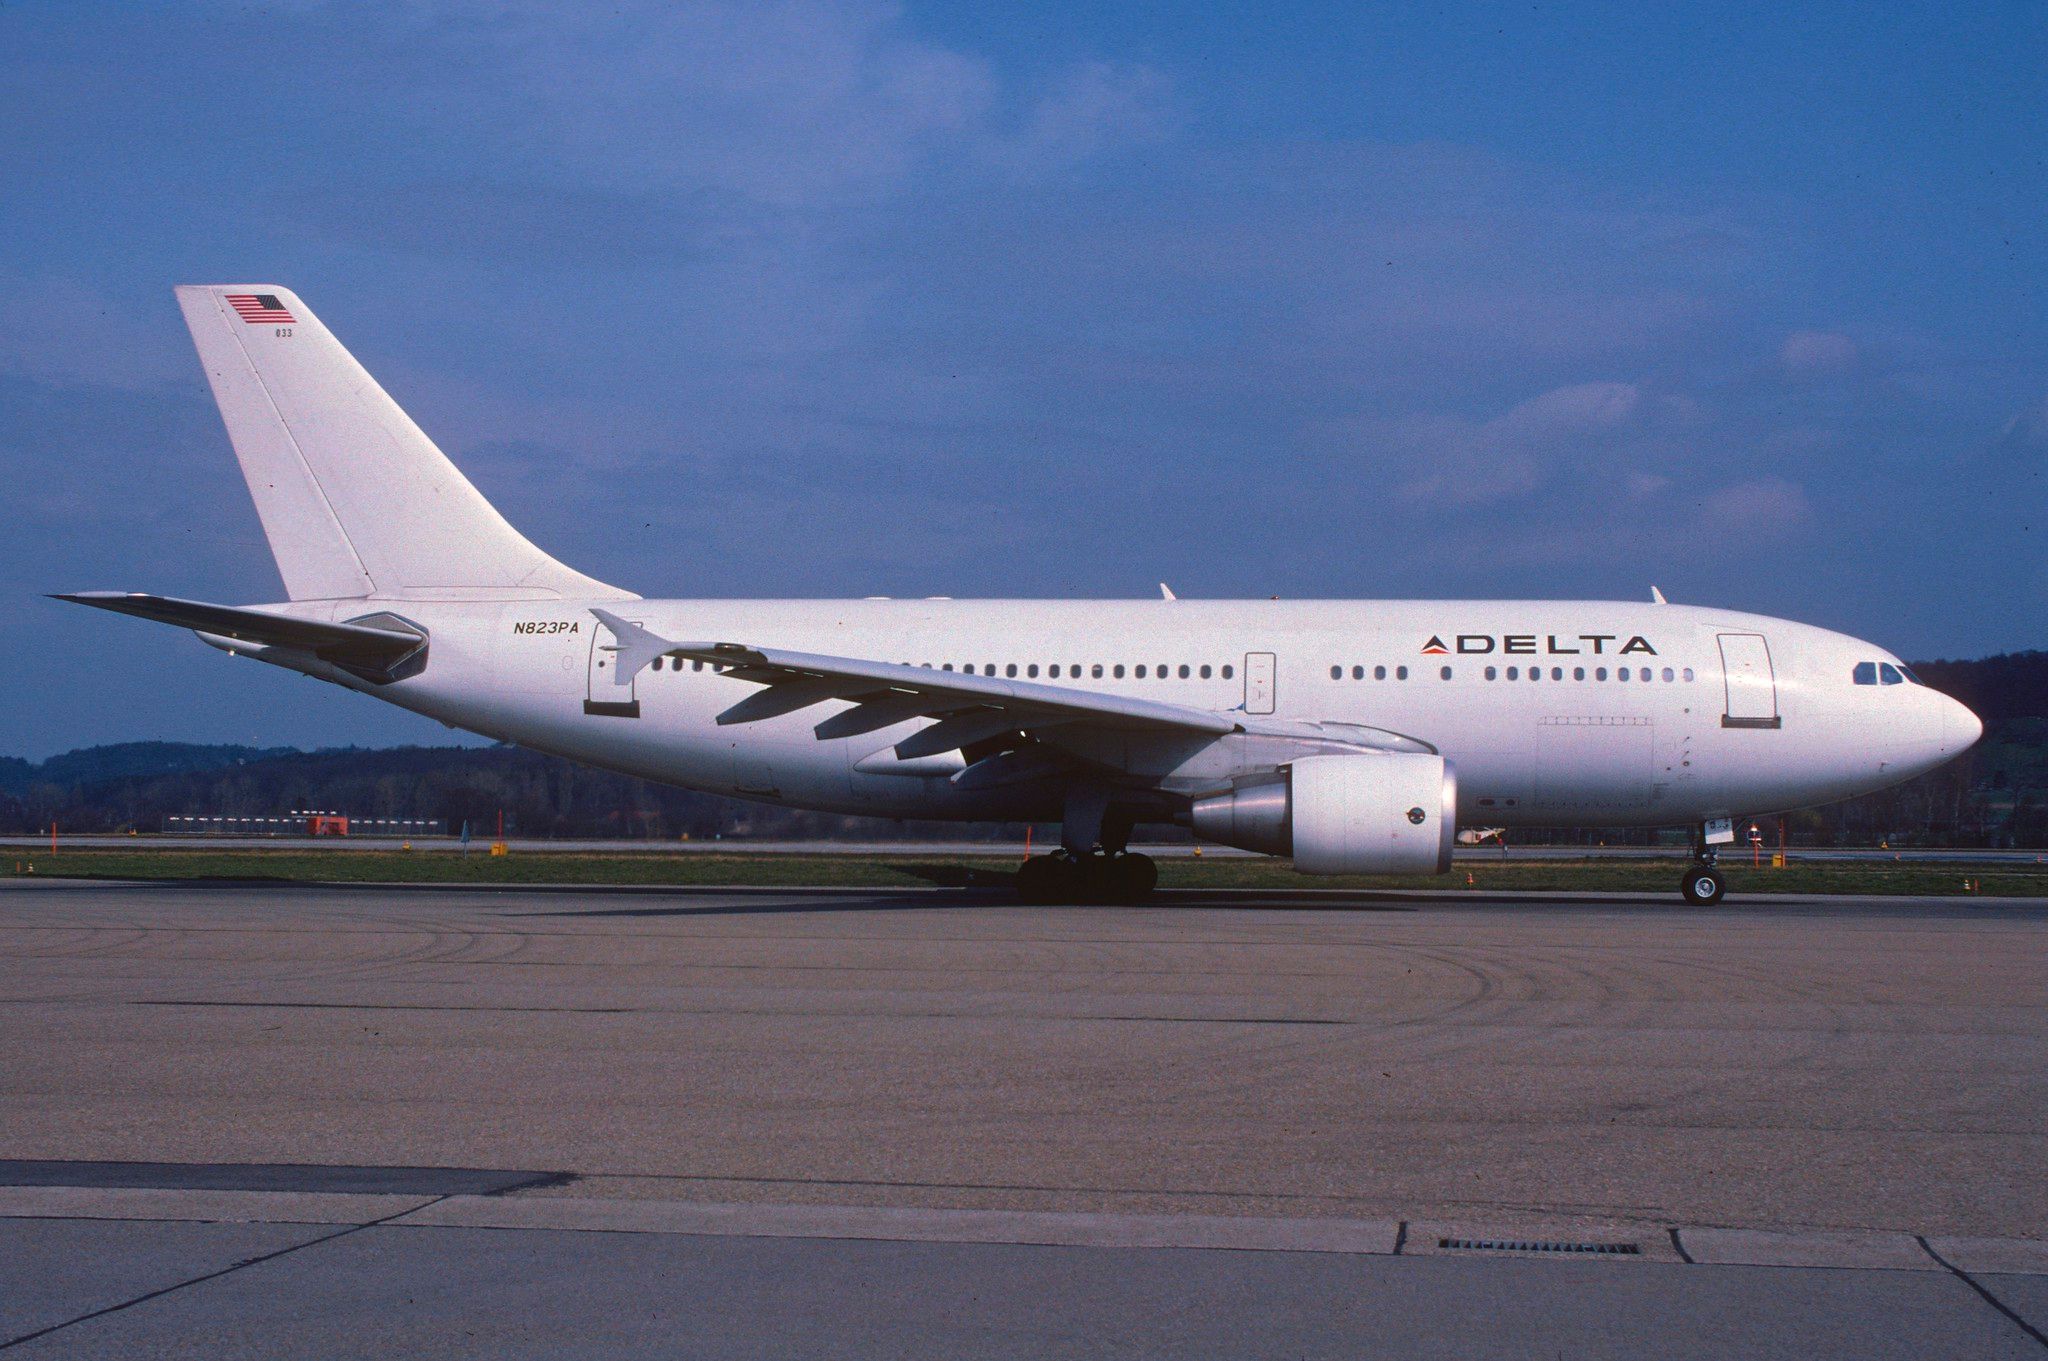 A Delta Air Lines Airbus A310 Taxiing At Zurich Airport.